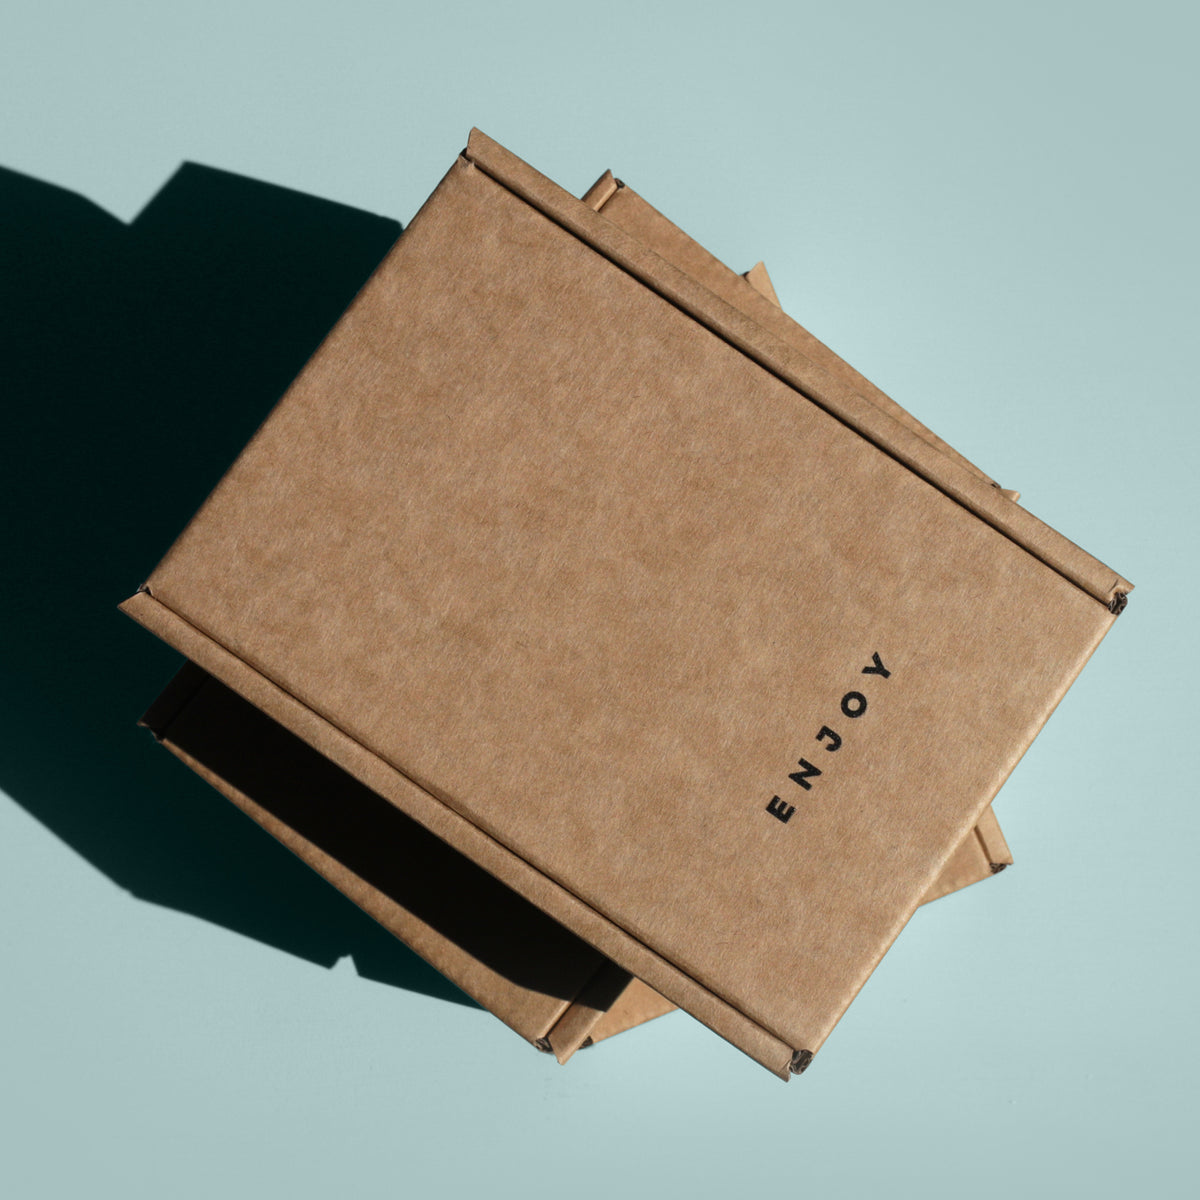 Ivadore recycled kraft paper box view from above on minty green background with &quot;enjoy&quot; written on top